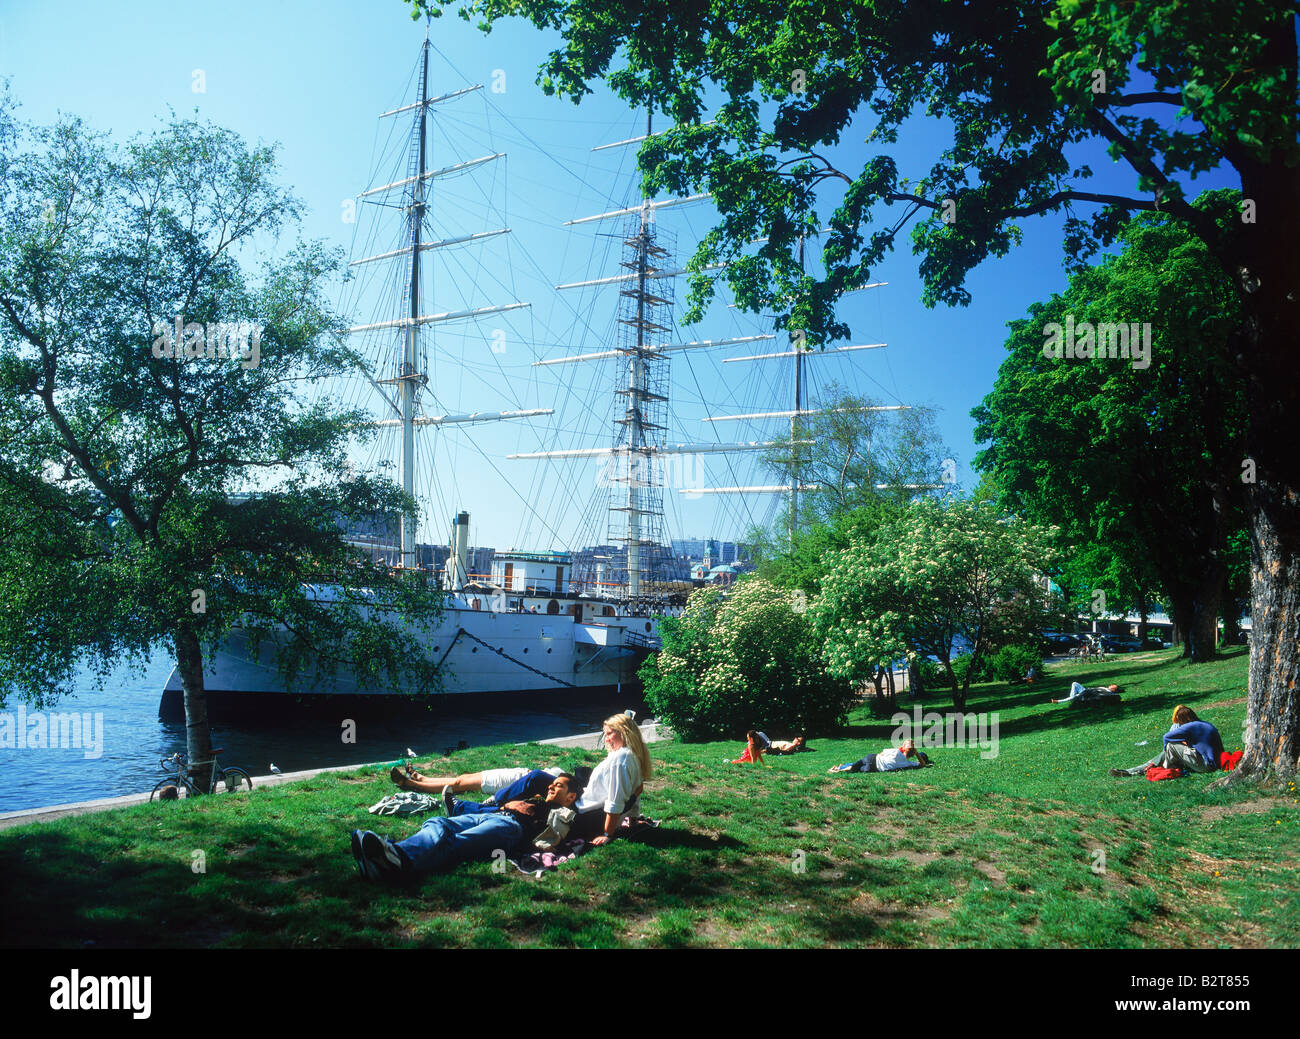 Couples on grass sharing romantic summer moments next to Af Chapman schooner moored at Skeppsholmen Island in Stockholm Stock Photo